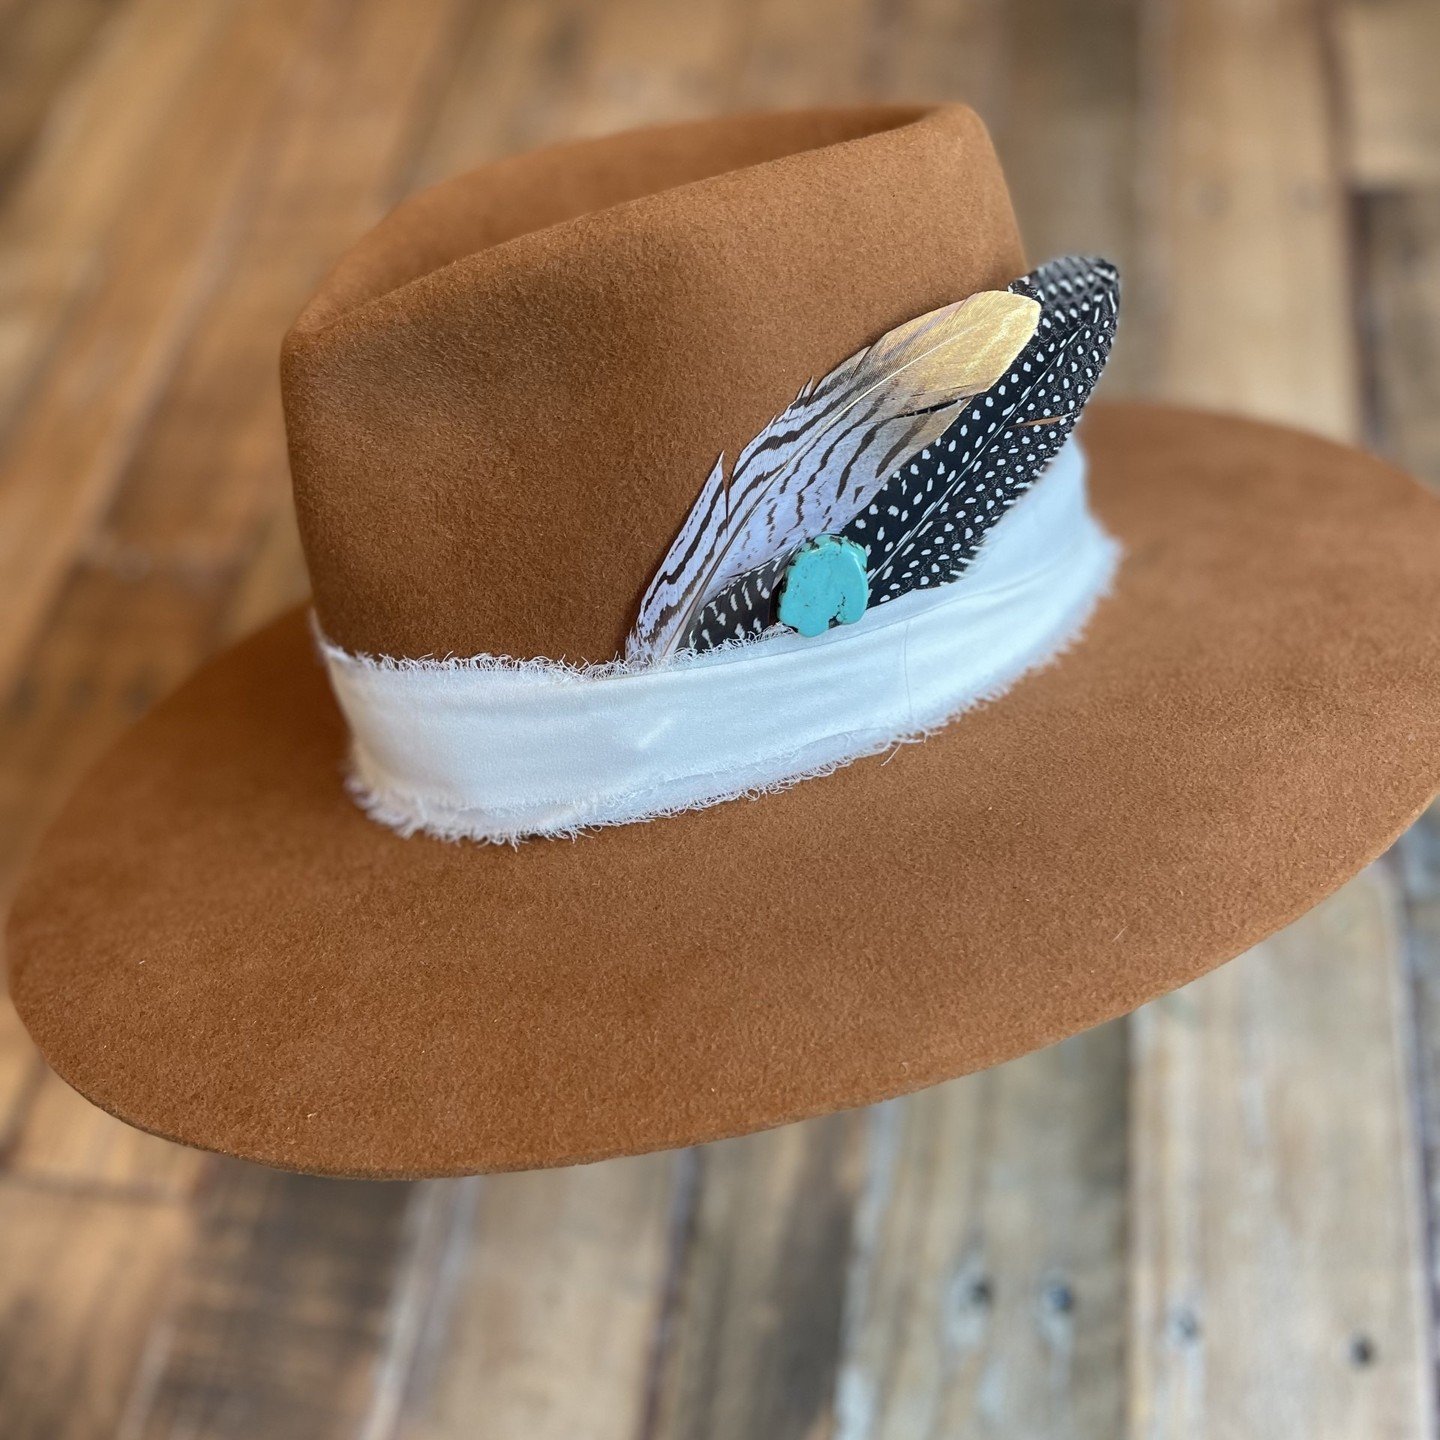 We're loving this rust color - with the pop of turquoise pin that can be worn year-round! This will be featured at the 2024 Garden Tour on May 7th (10-5pm) @ The San Francisco Yacht Club. Come shop our hat line!

https://www.marinhealthraccoons-garde